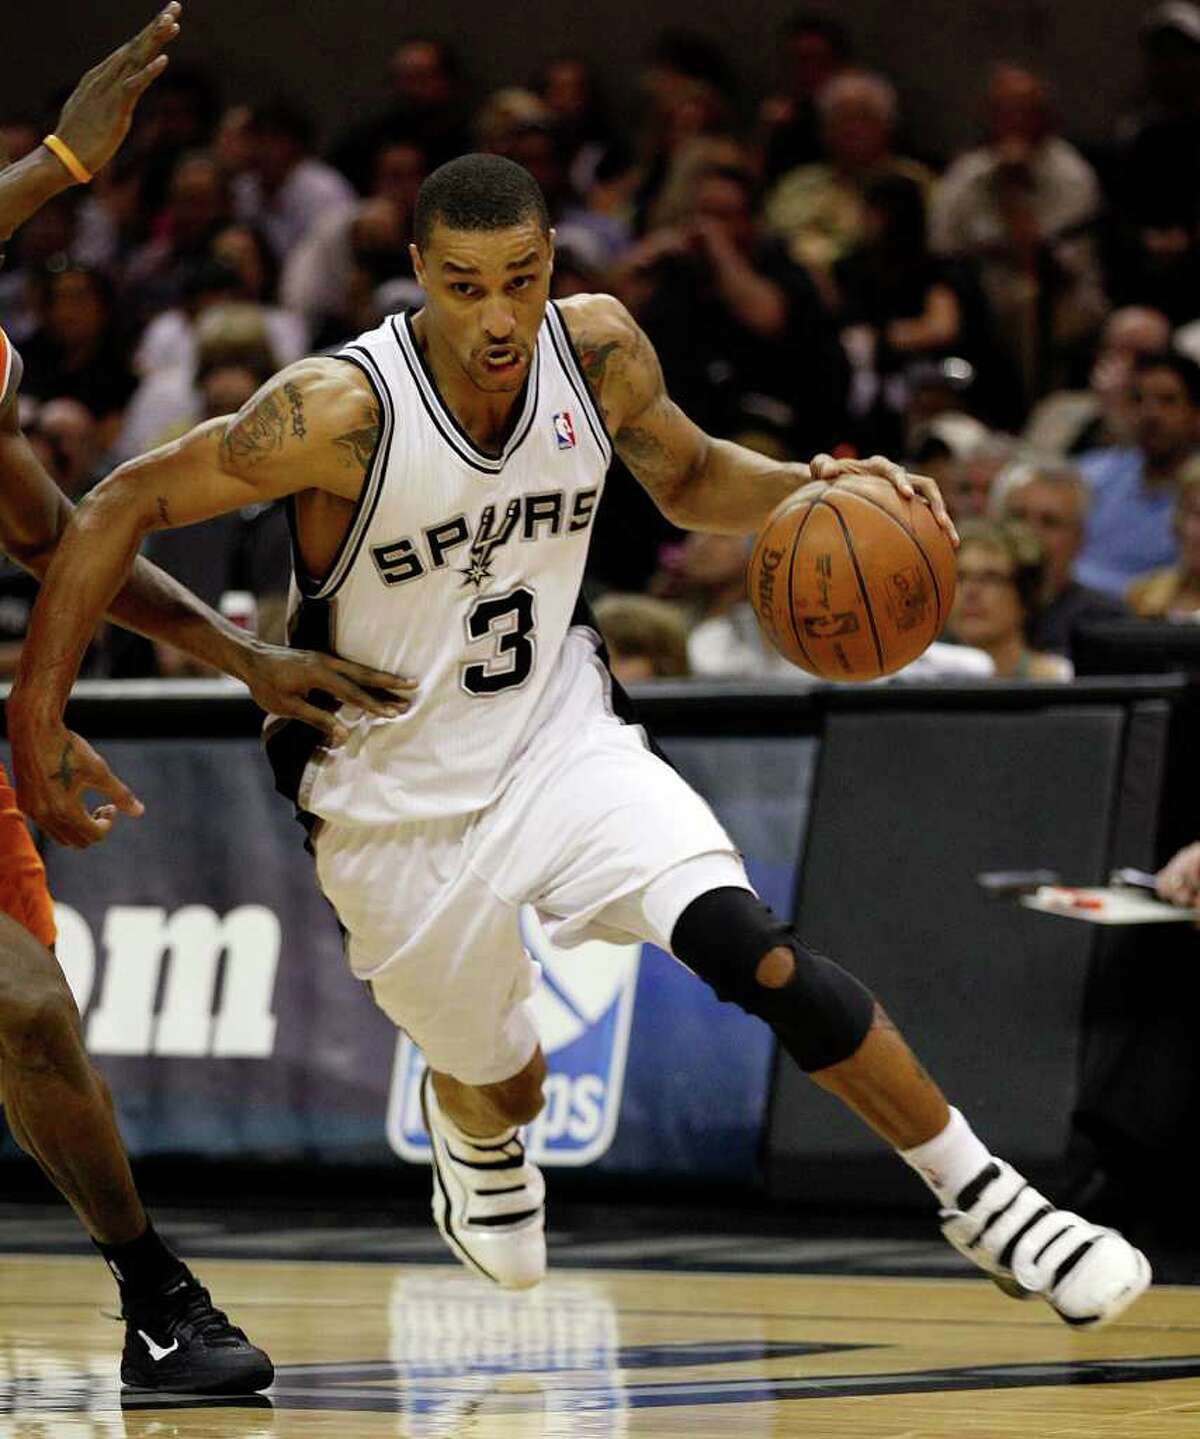 SPURS -- San Antonio Spurs George Hill drives to the goal past Phoenix Suns Zabian Dowdell during the second half at the AT&T Center, Sunday, April 3, 2011. The Spurs won 114-97 and Hill ended up 29 points. JERRY LARA/glara@express-news.net